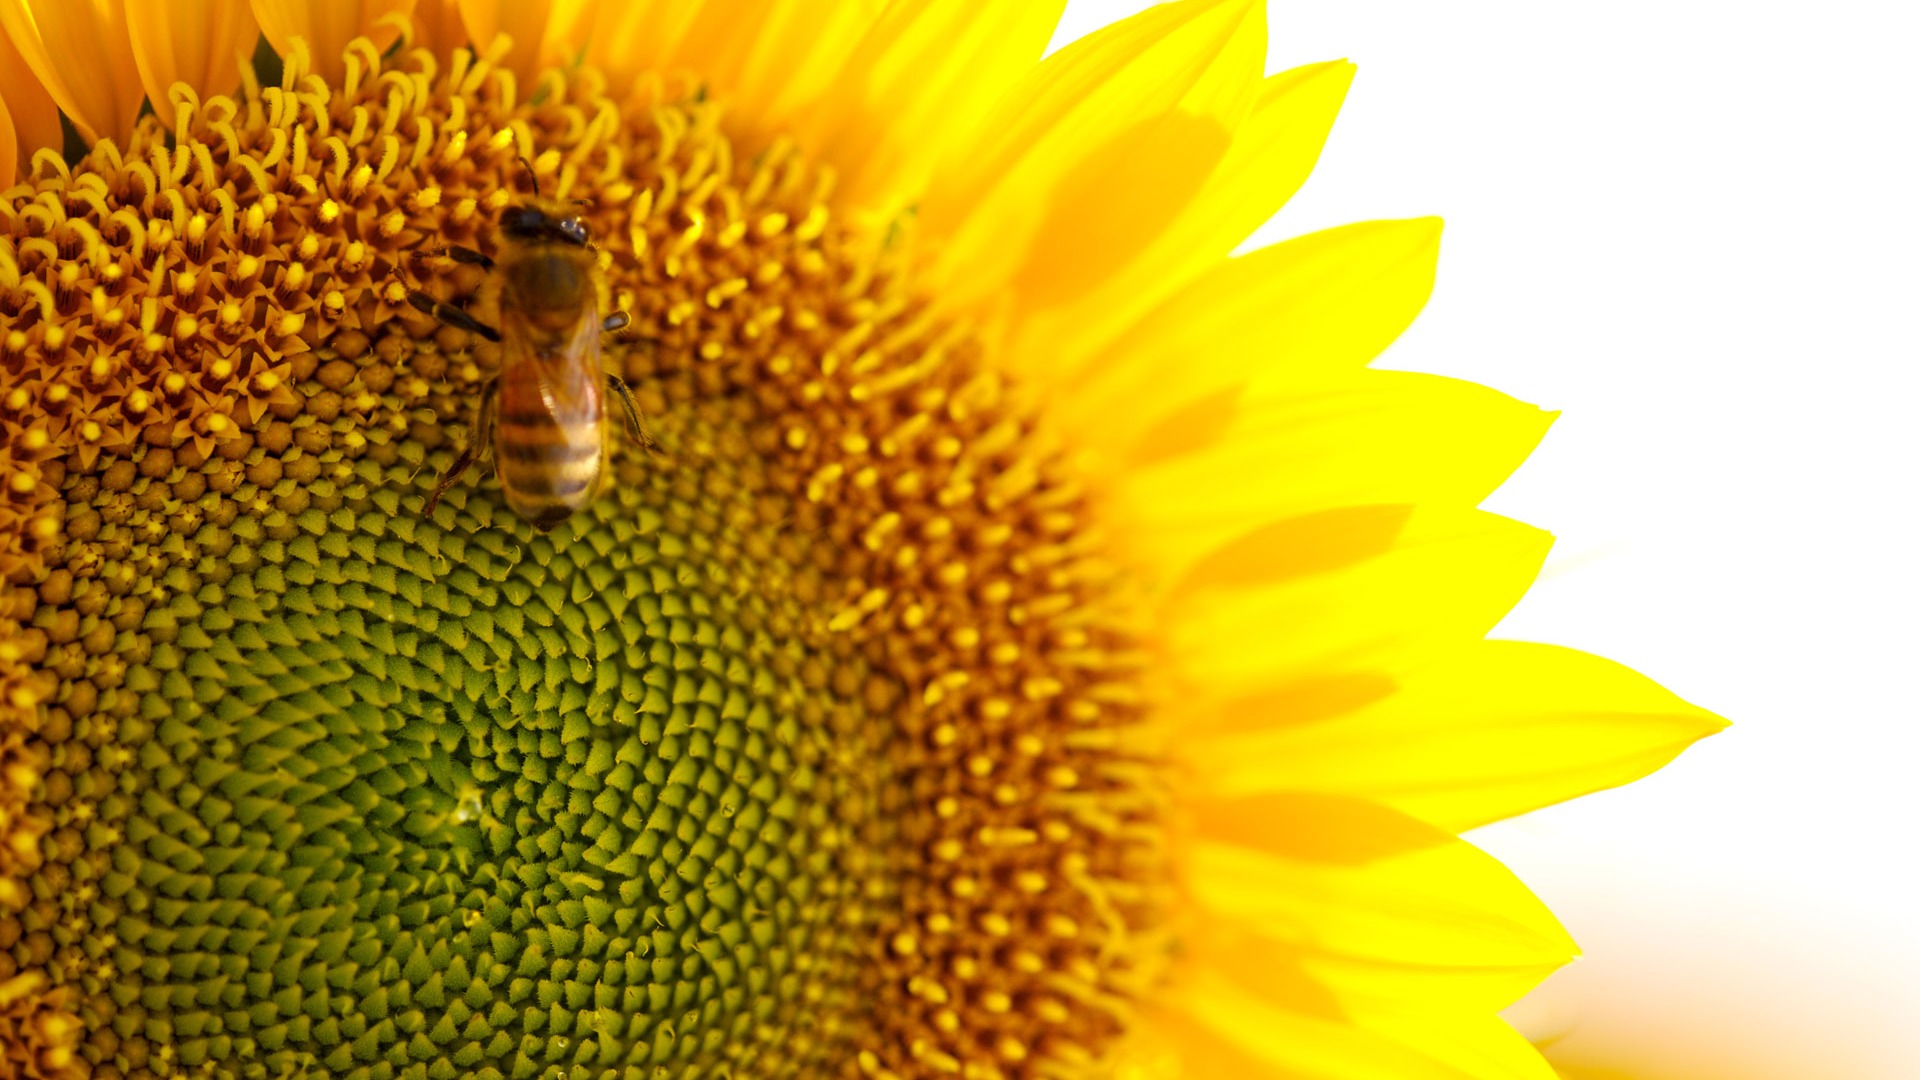 Sunny sunflower photo HD Wallpapers #33 - 1920x1080